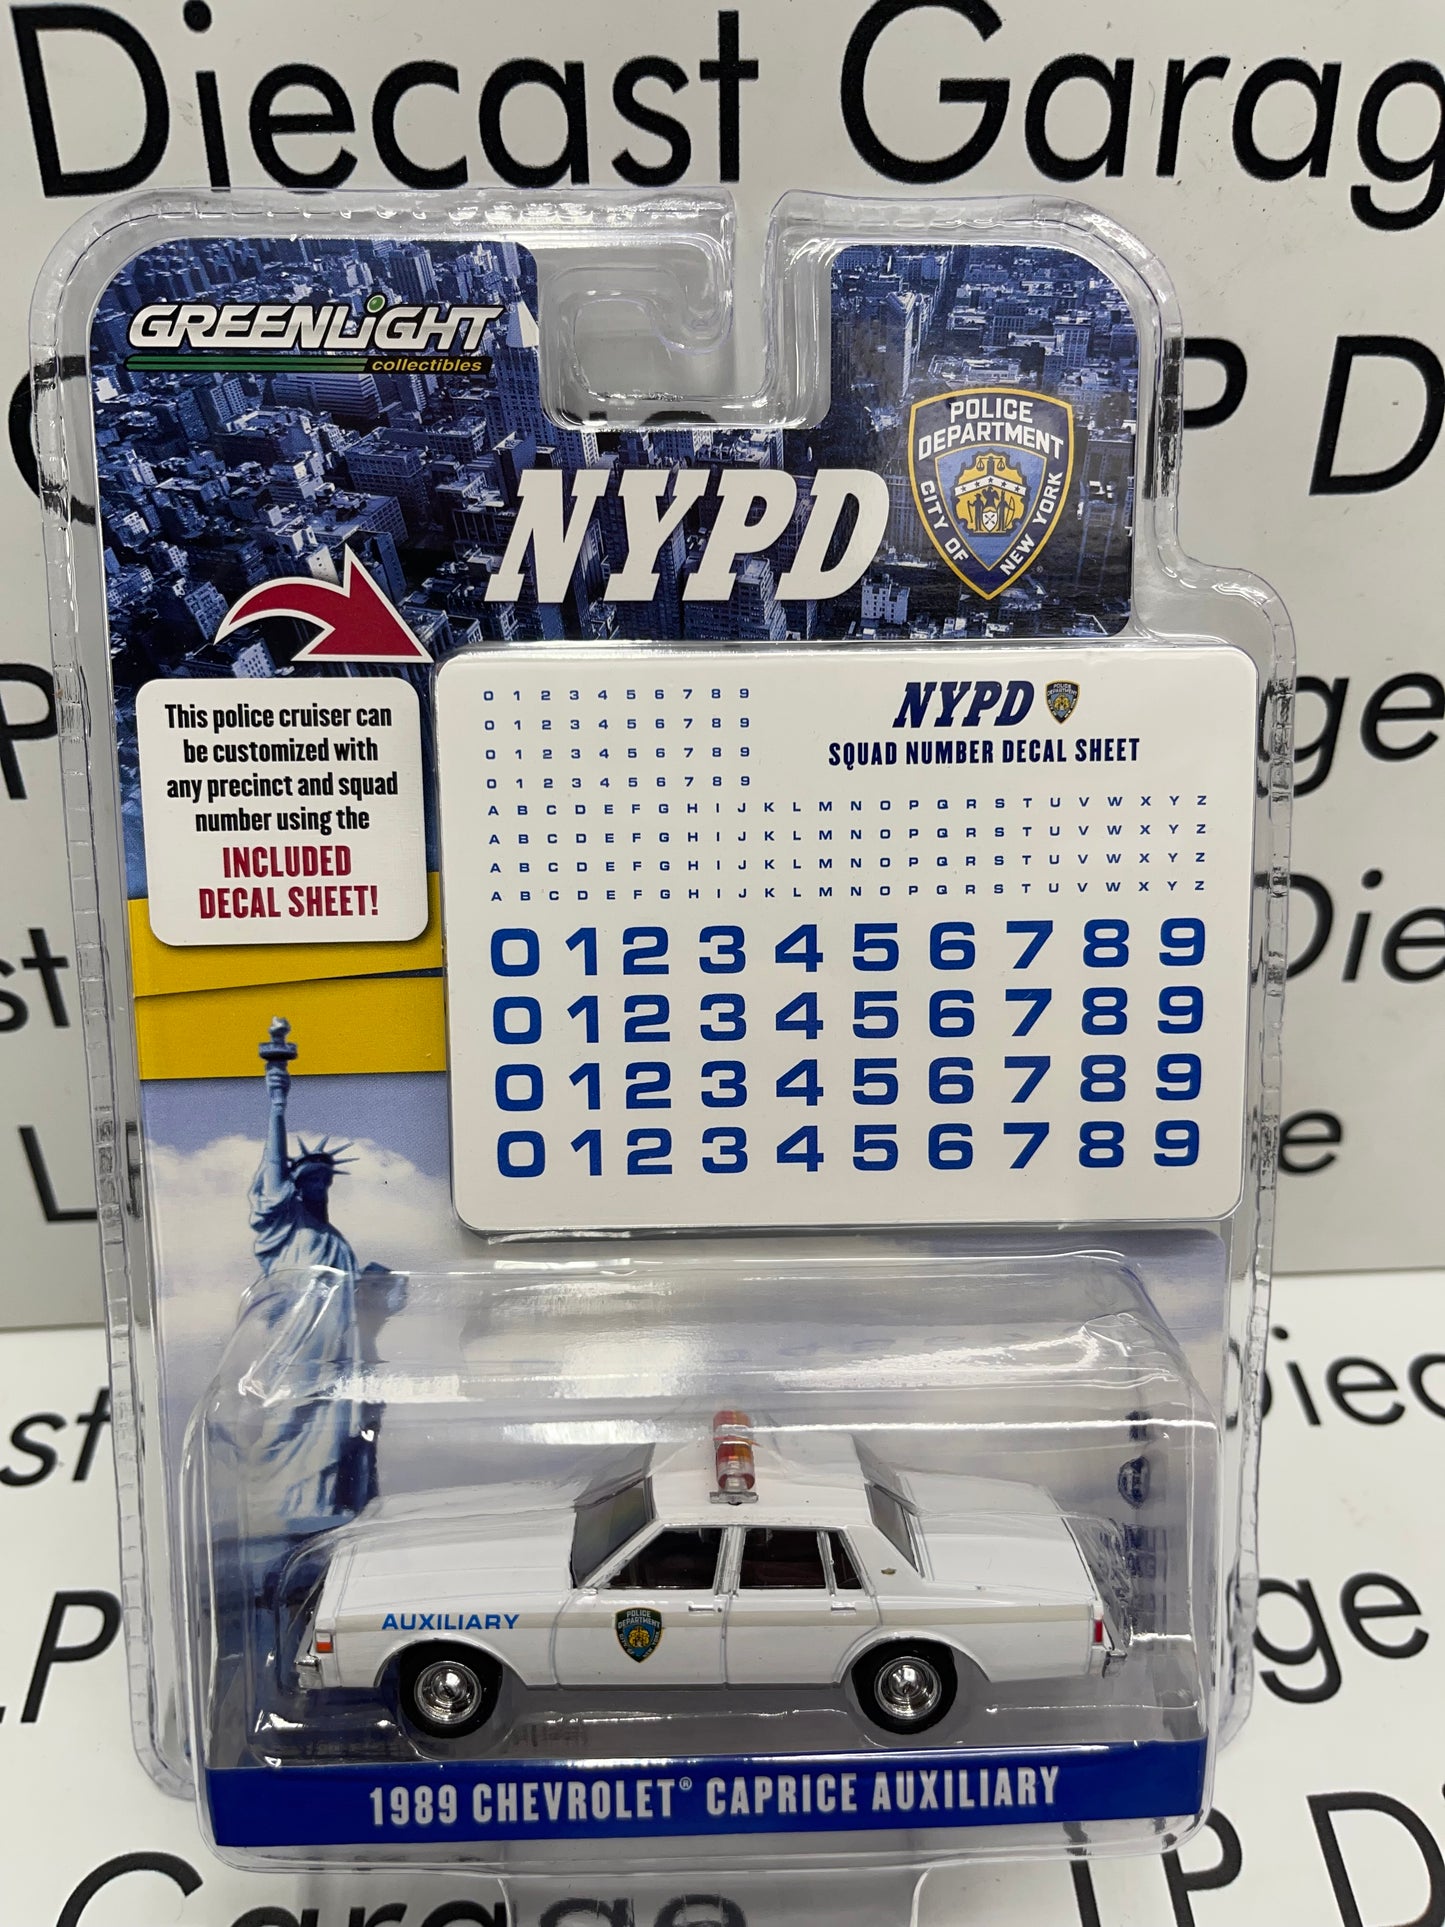 GREENLIGHT 1989 Chevrolet Caprice Auxiliary NYPD Police w/ Decal Sheet 1:64 Diecast